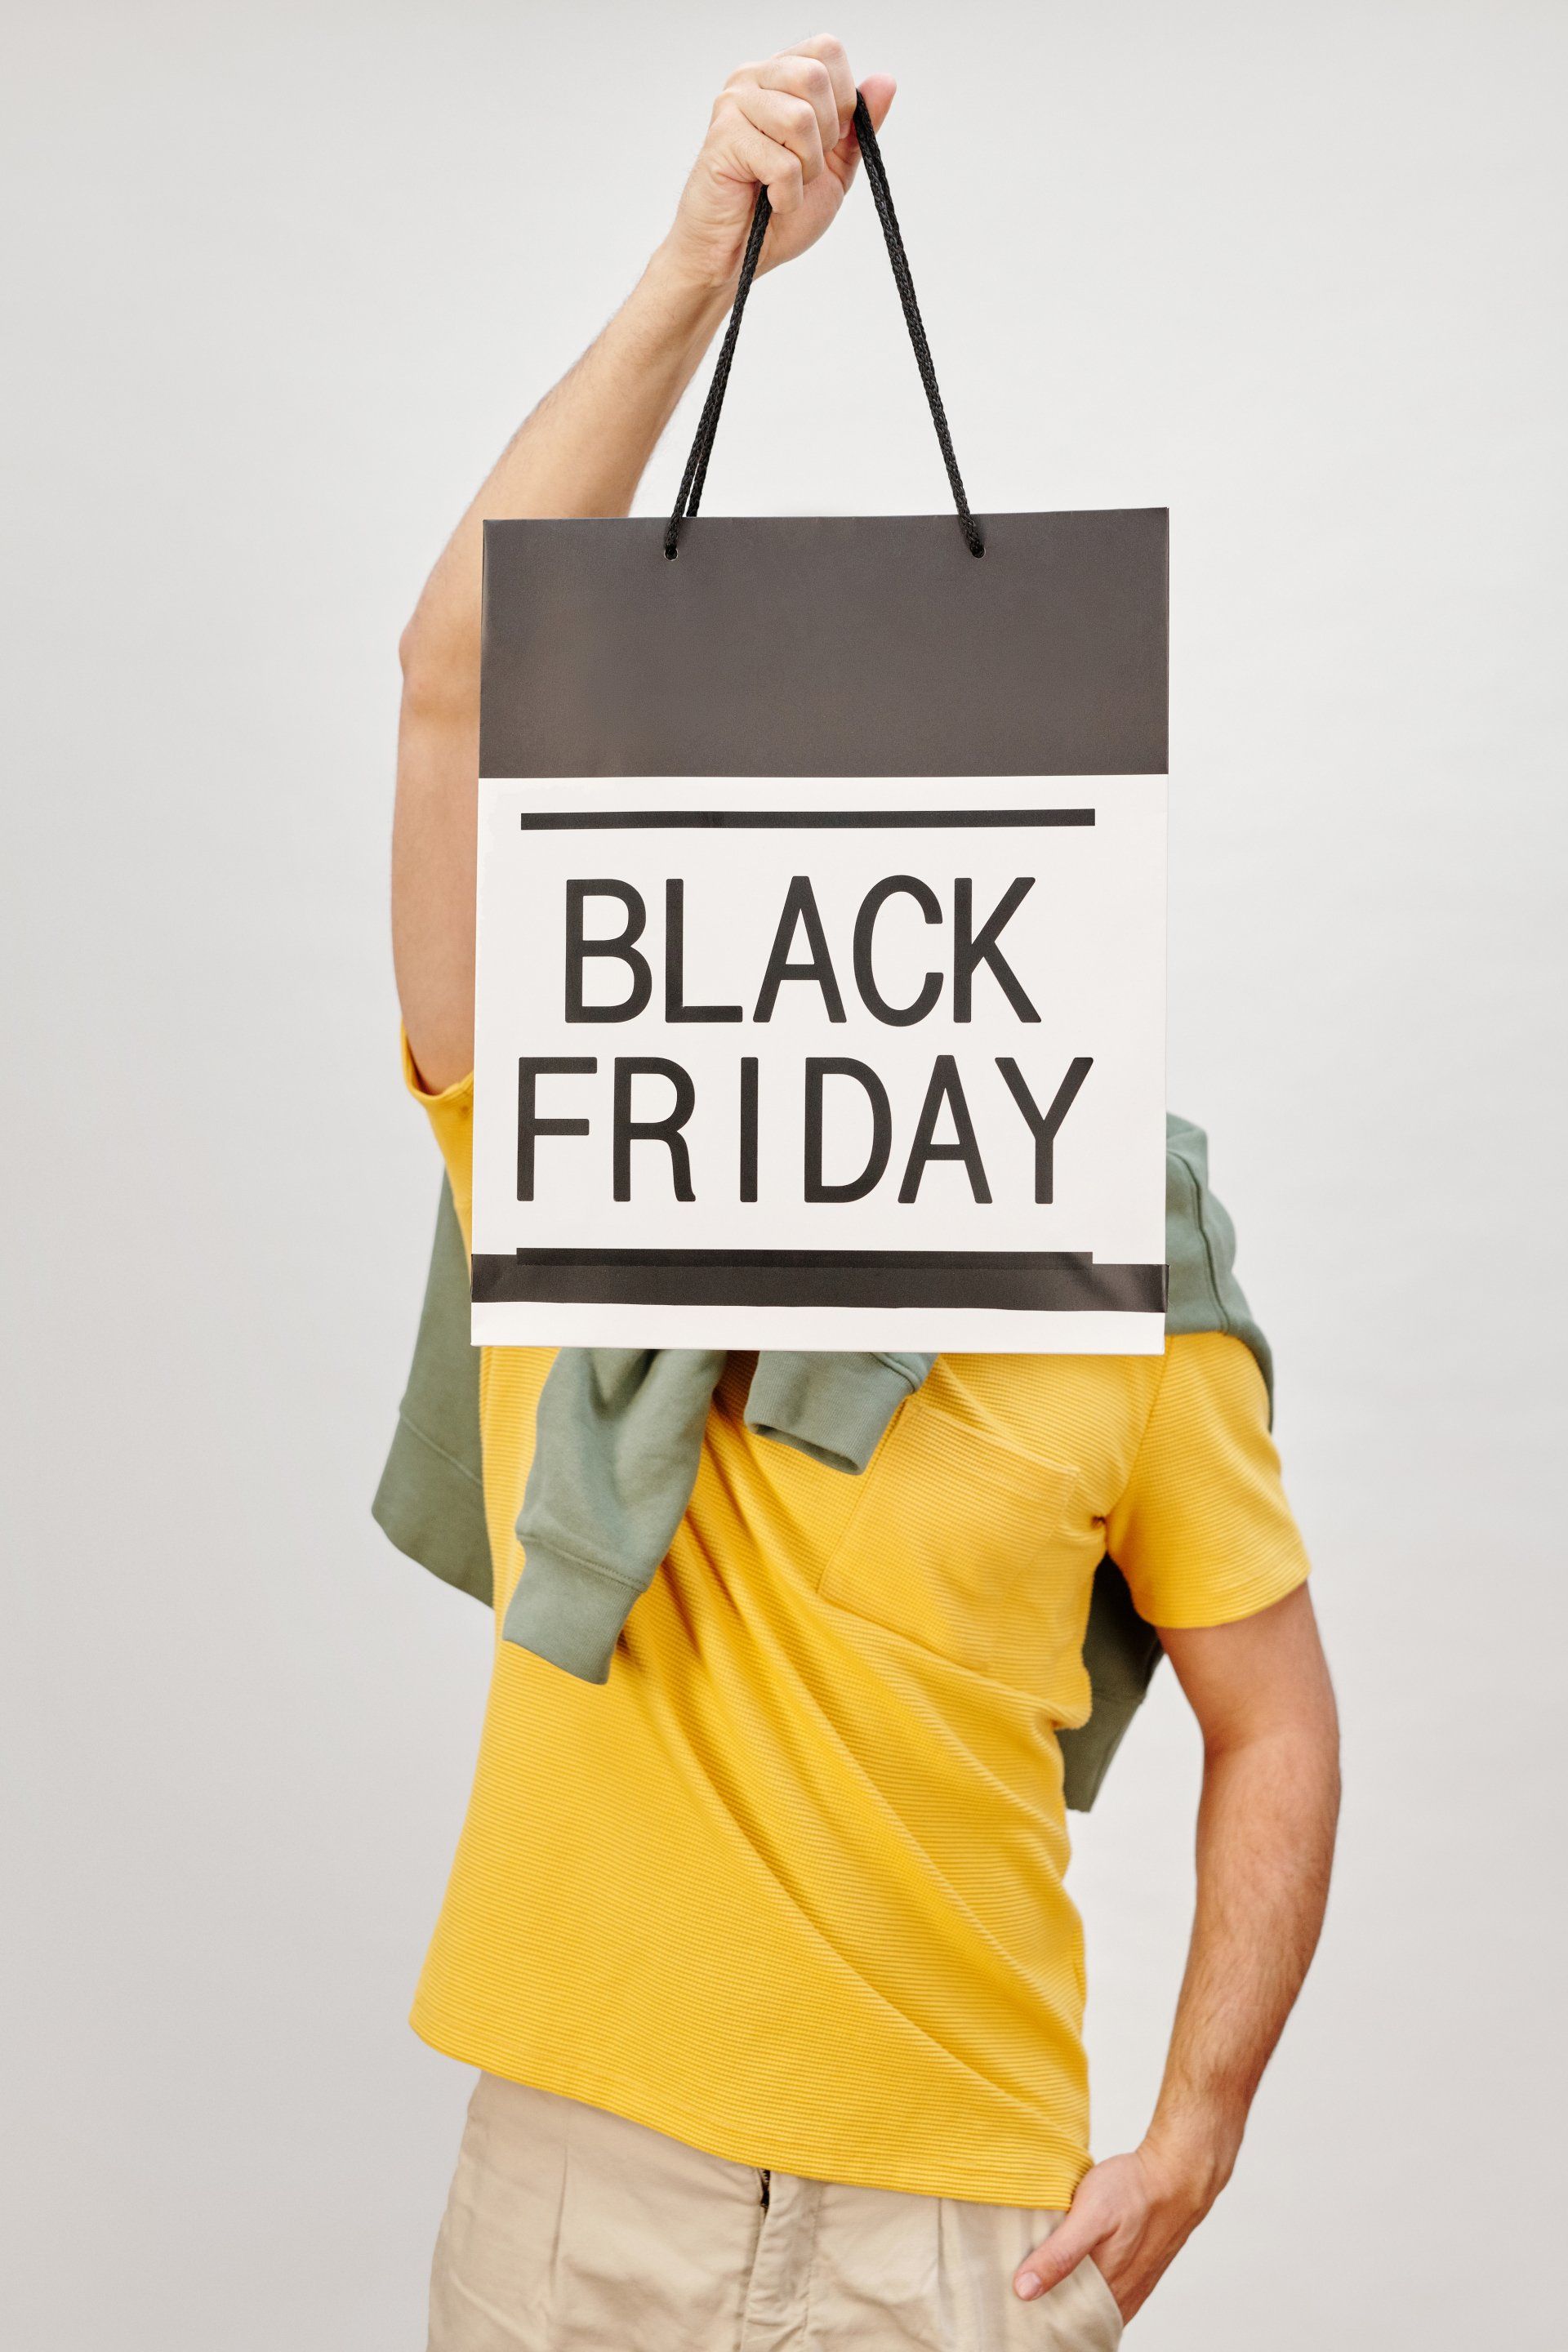 Black Friday Campaign Tips